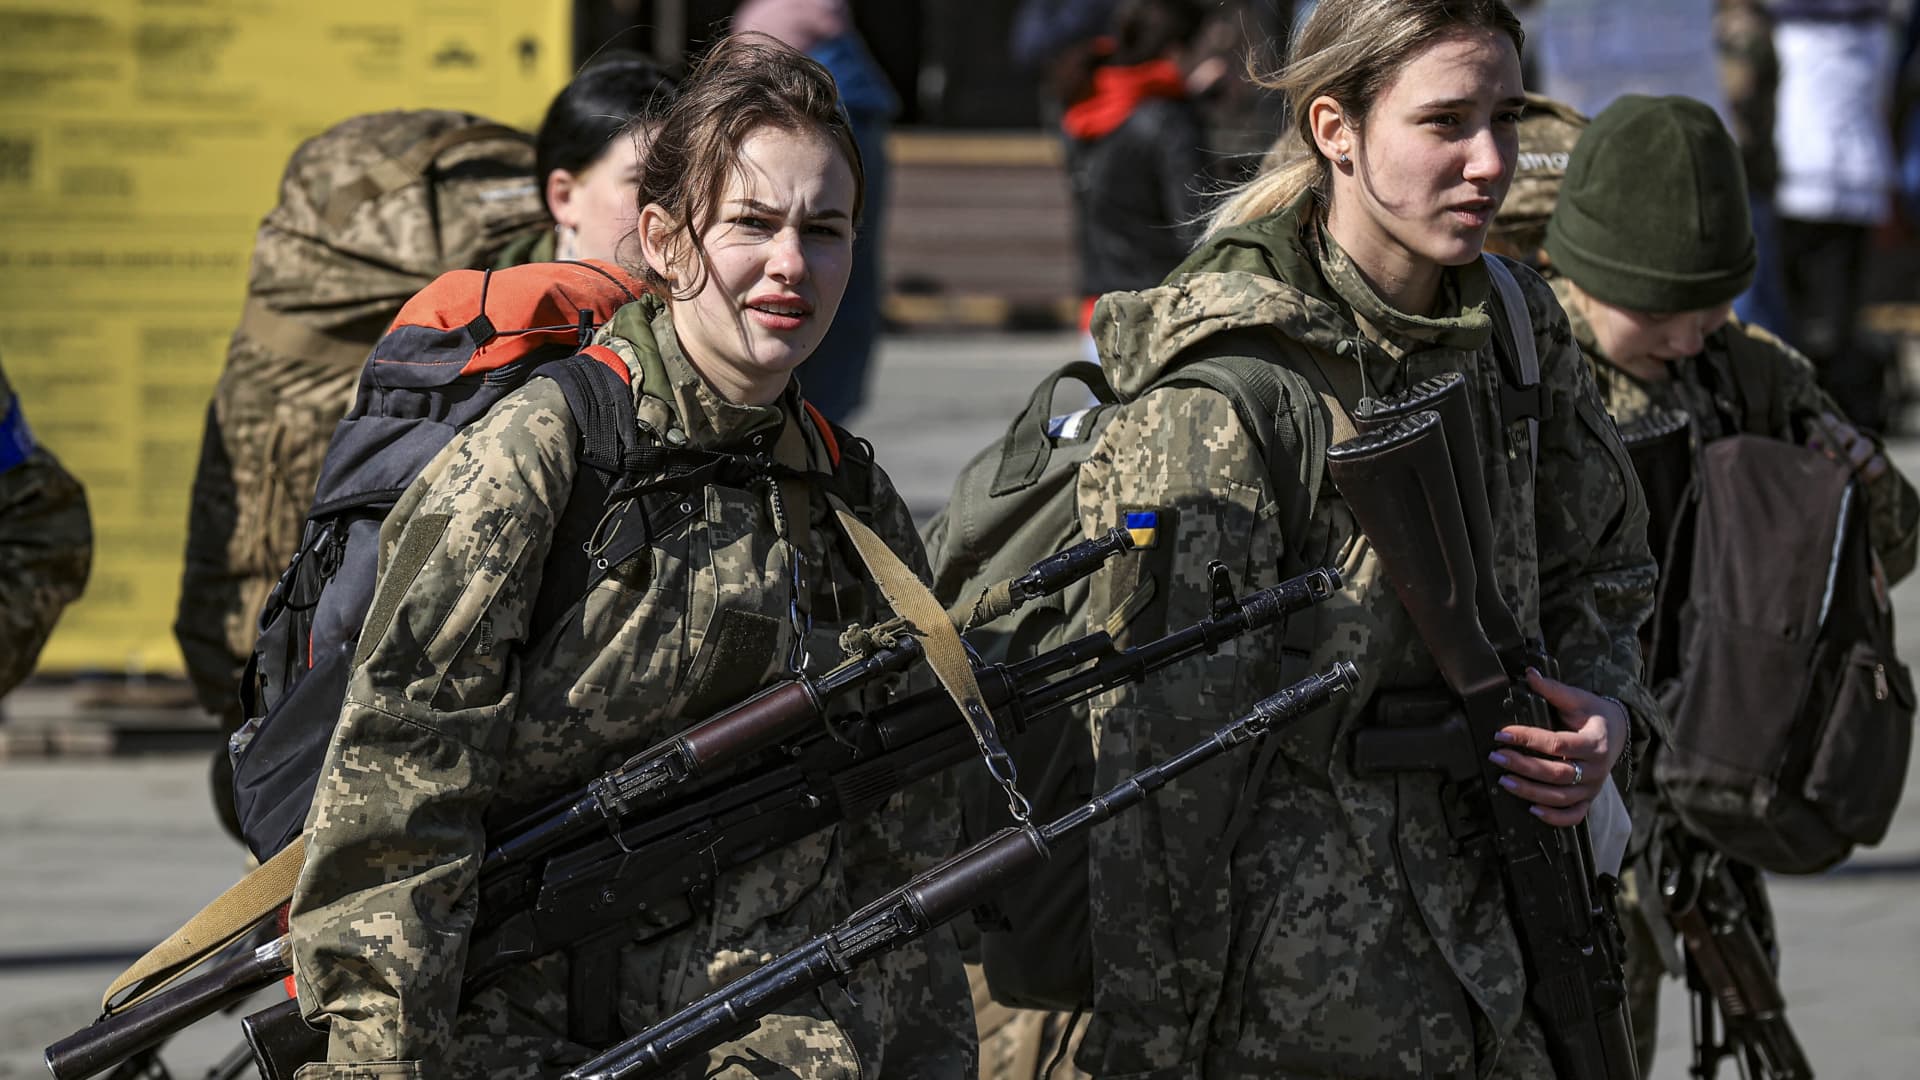 Ukrainian female soldiers are seen before heading to the frontline as Ukrainian displaced civilians continue to swarm around the train station to flee due to ongoing Russian attacks, in Lviv, Ukraine on March 24, 2022.